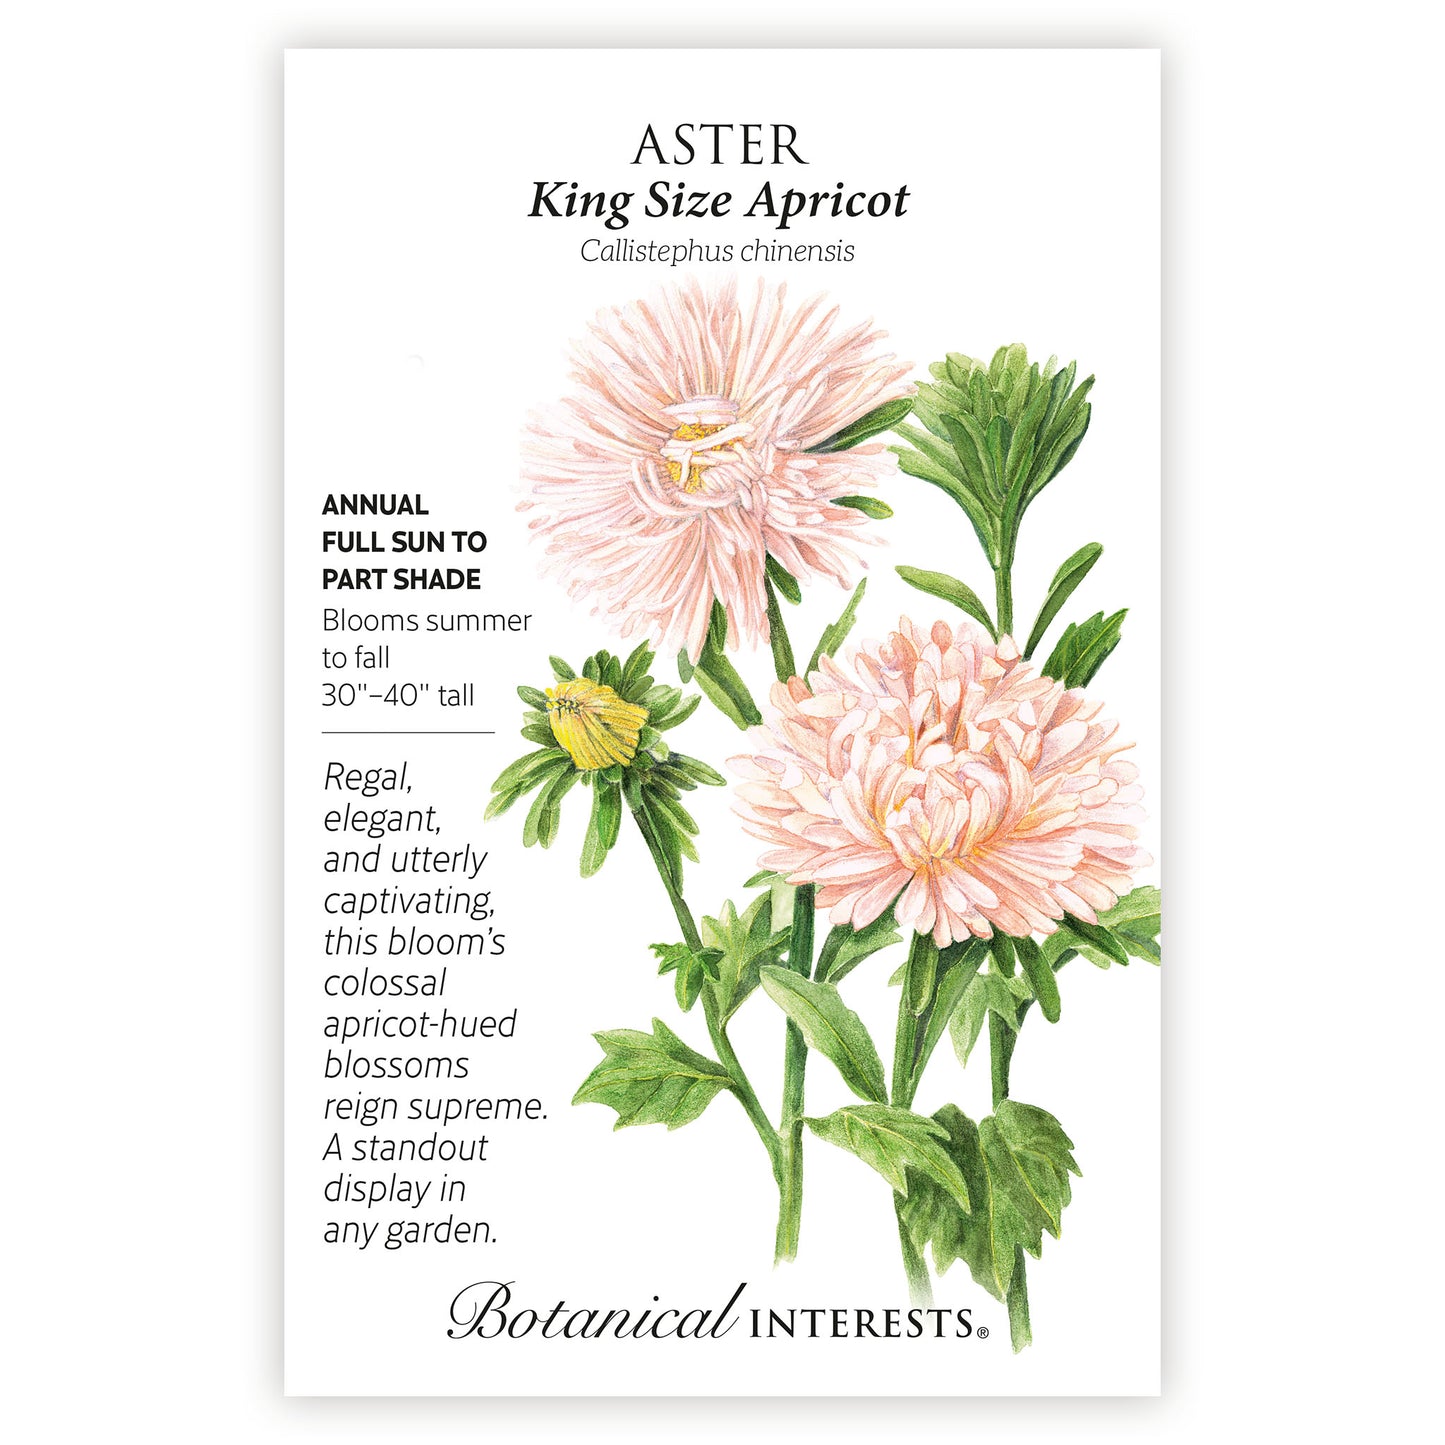 King Size Apricot Aster Seeds